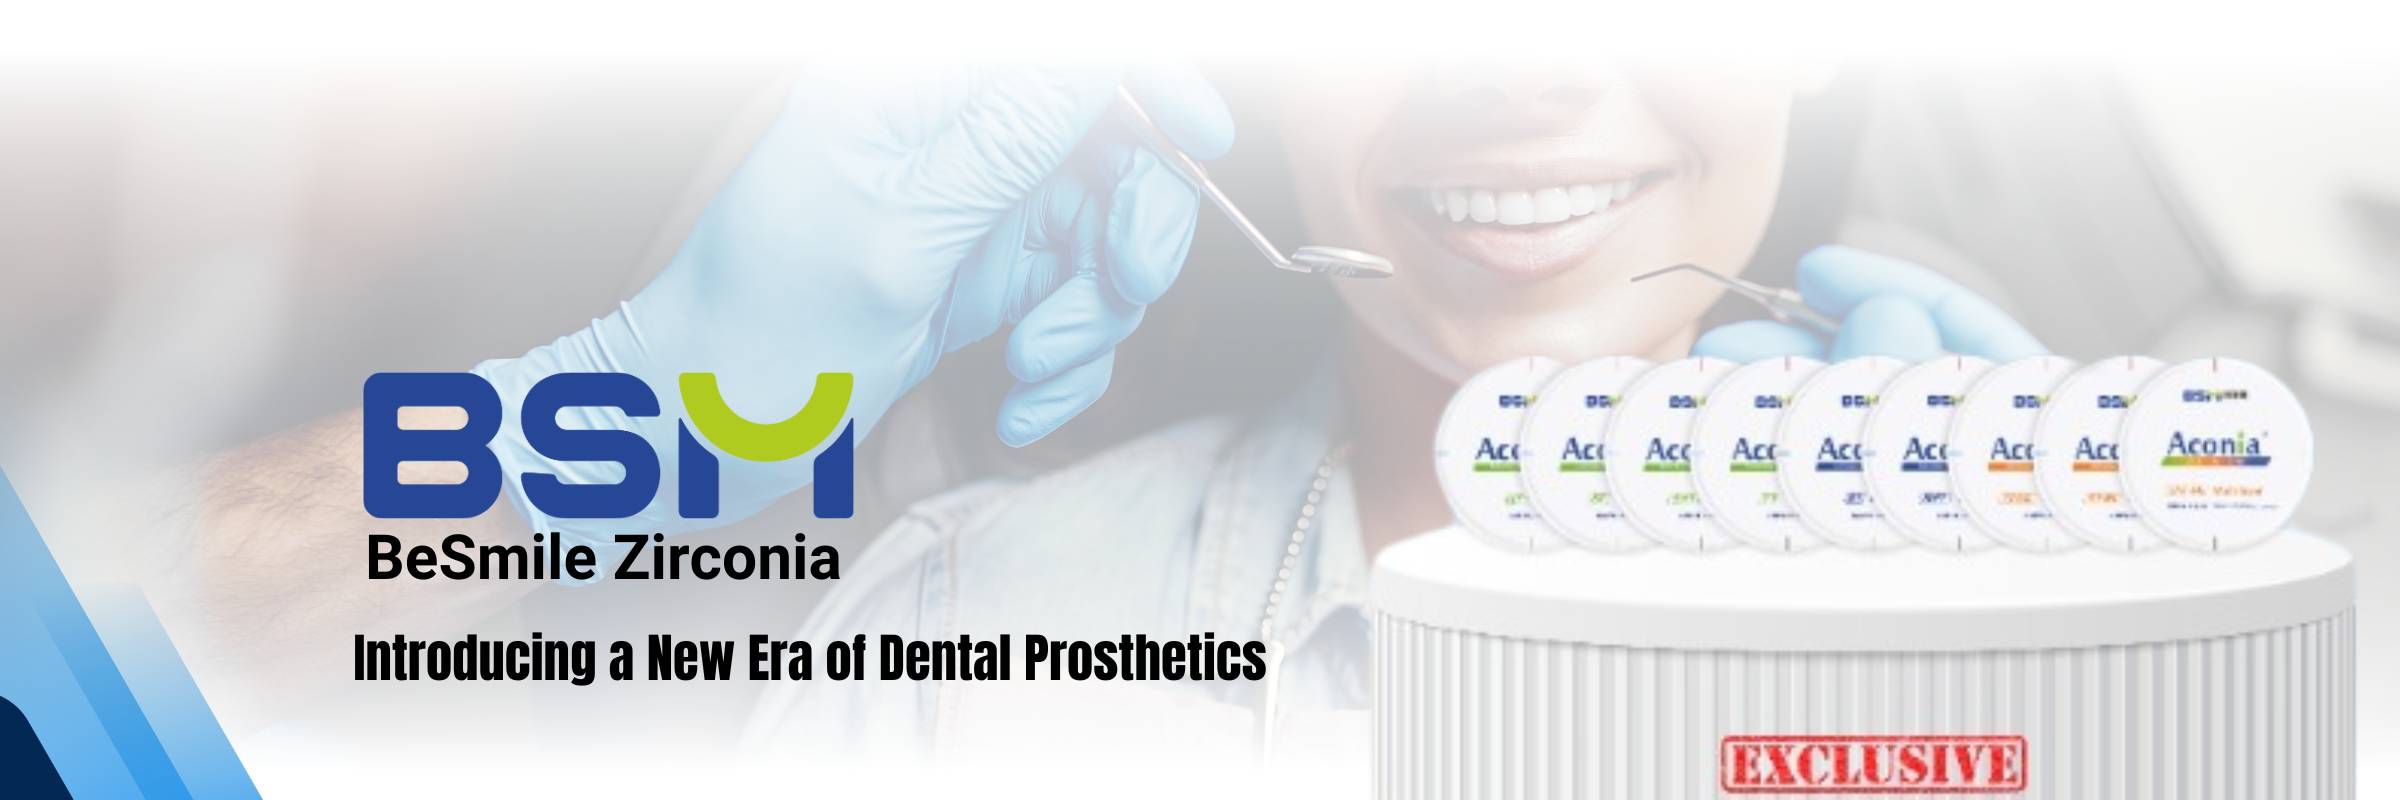 Besmile Zirconia Product Page Banner